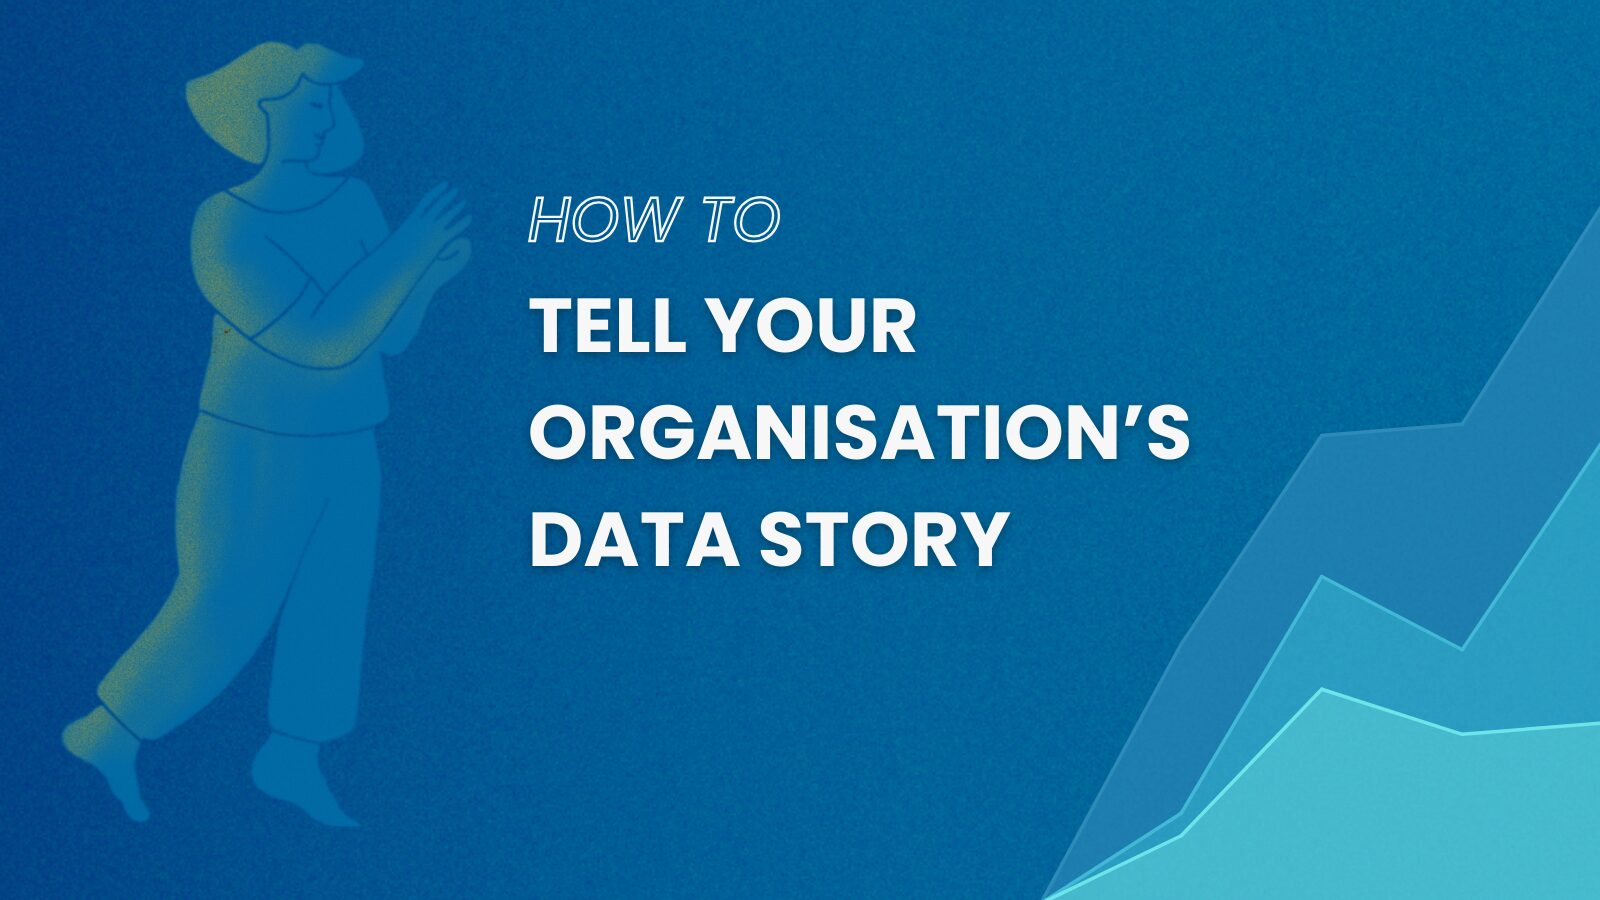 How to tell your organisation’s data story